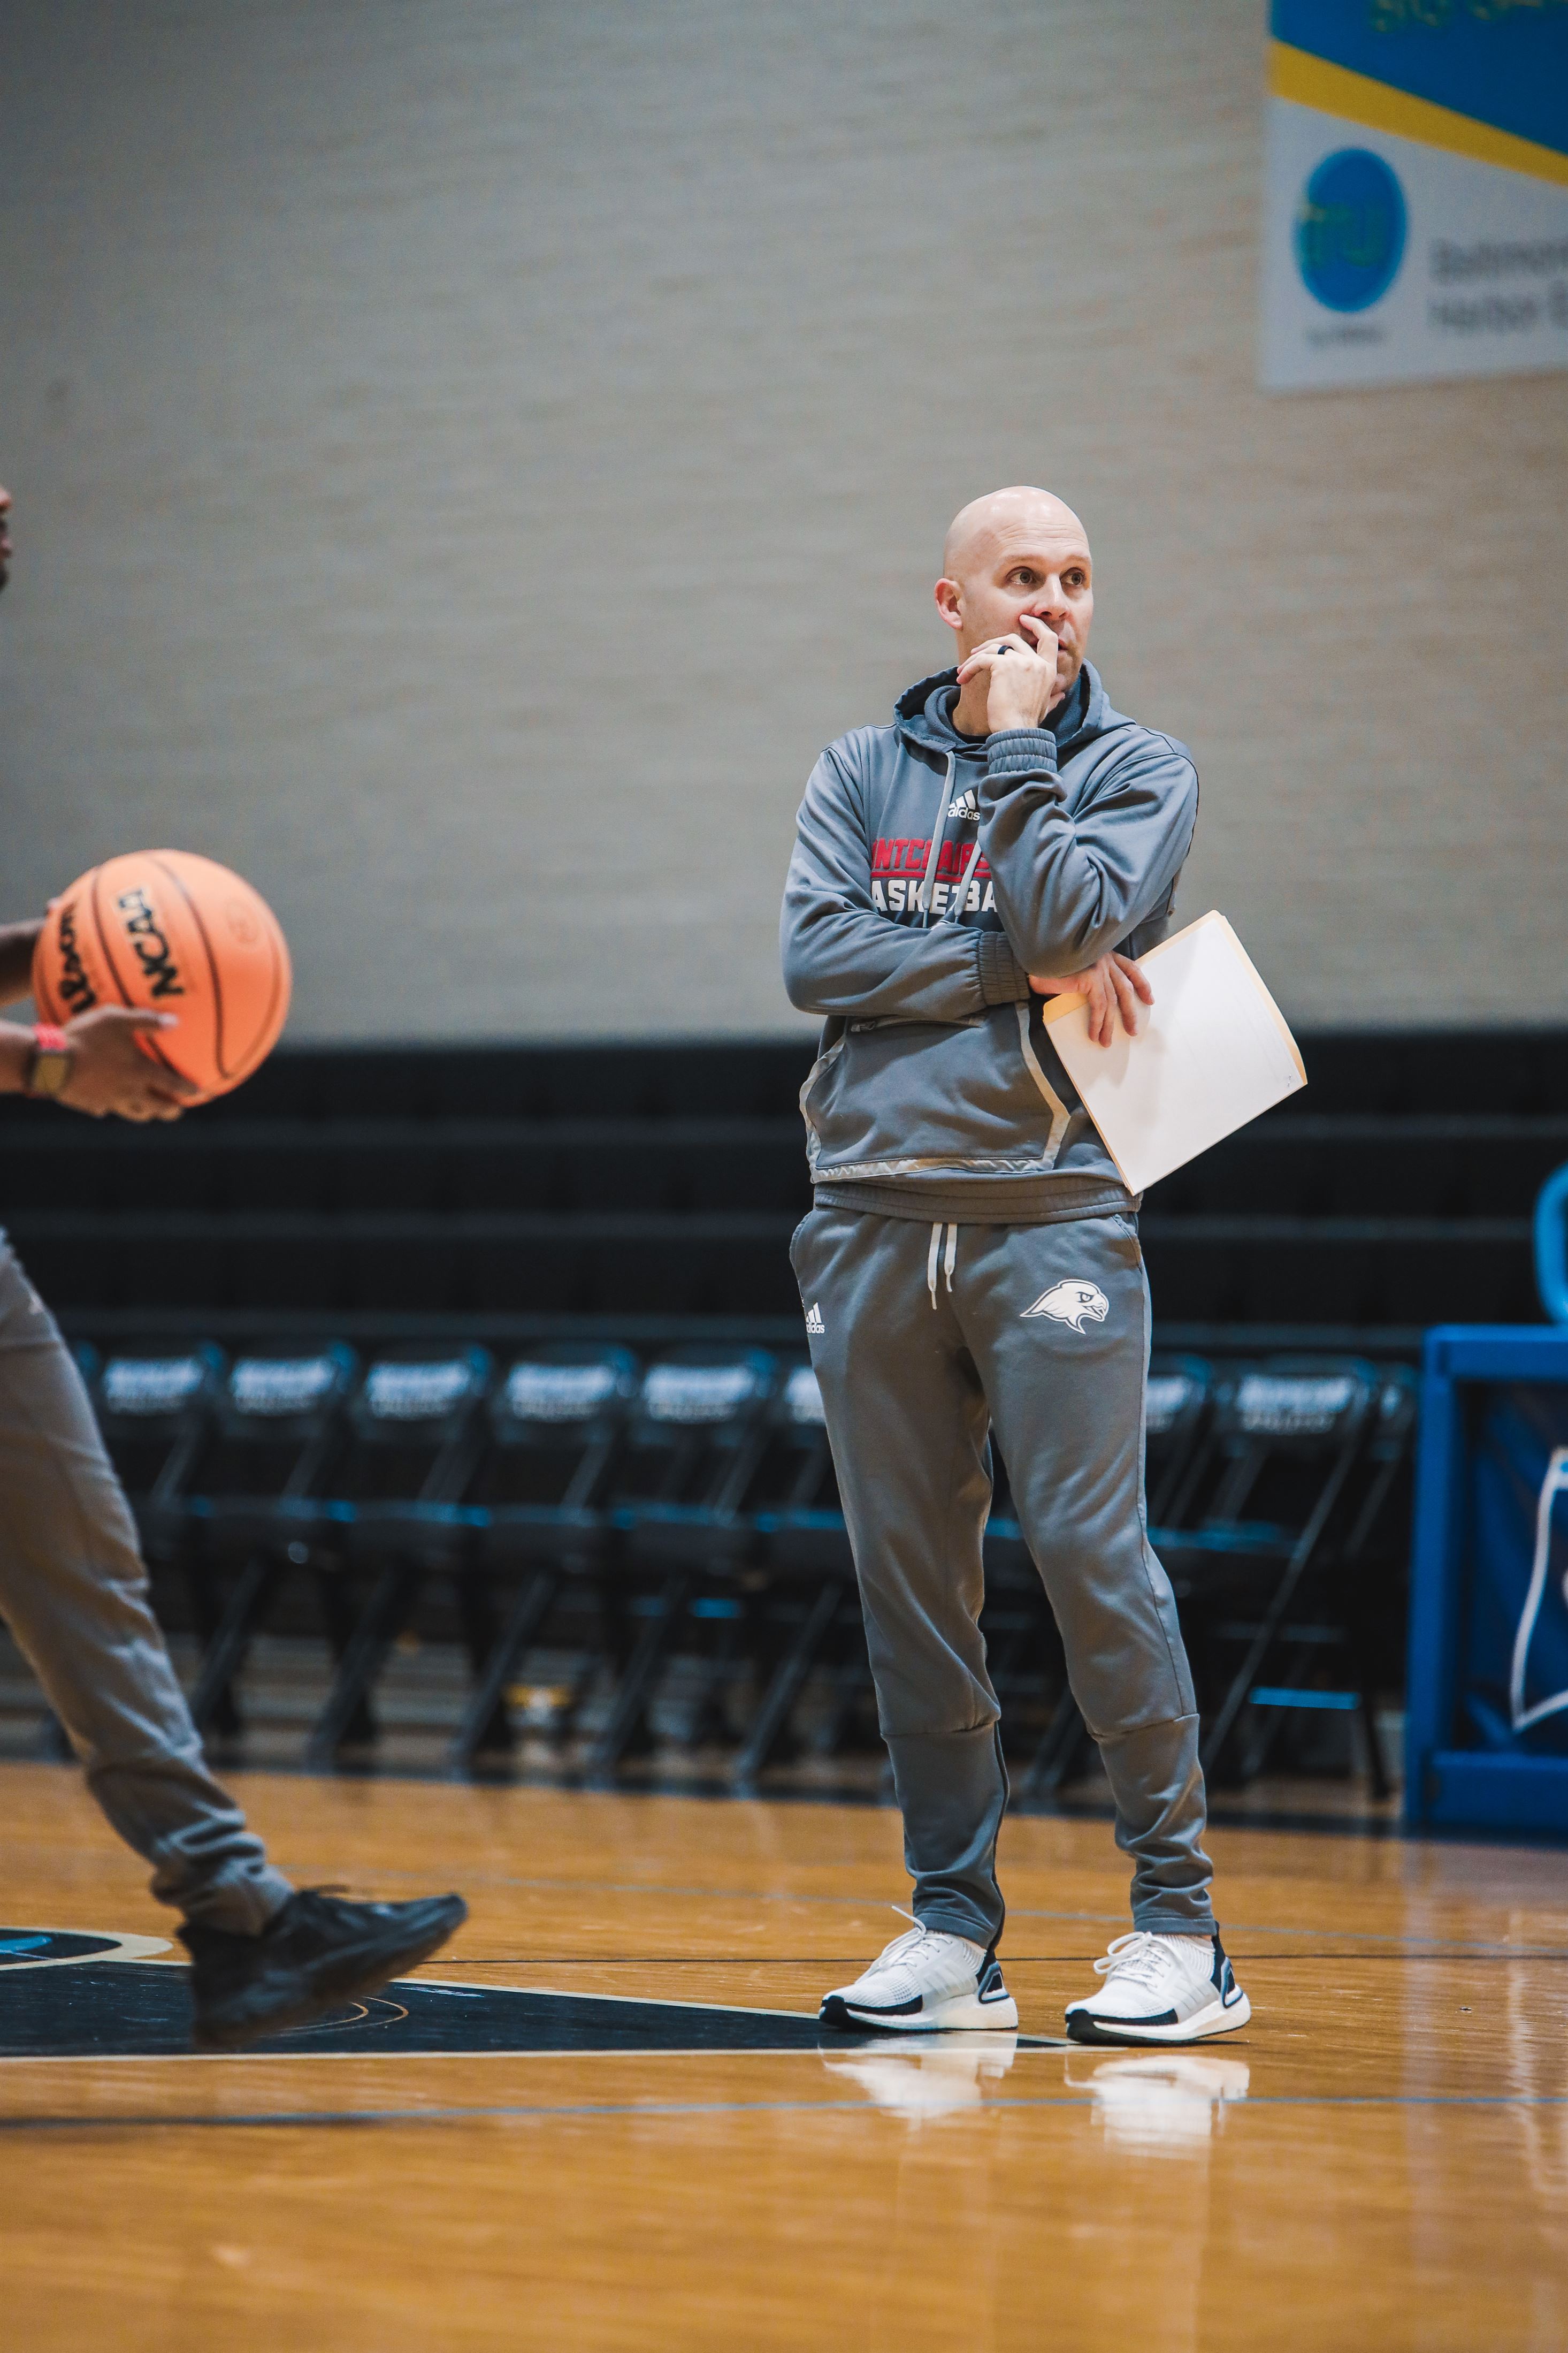 Head coach Justin Potts looks ahead at his team during a shootaround. Photo courtesy of Markell Robinson